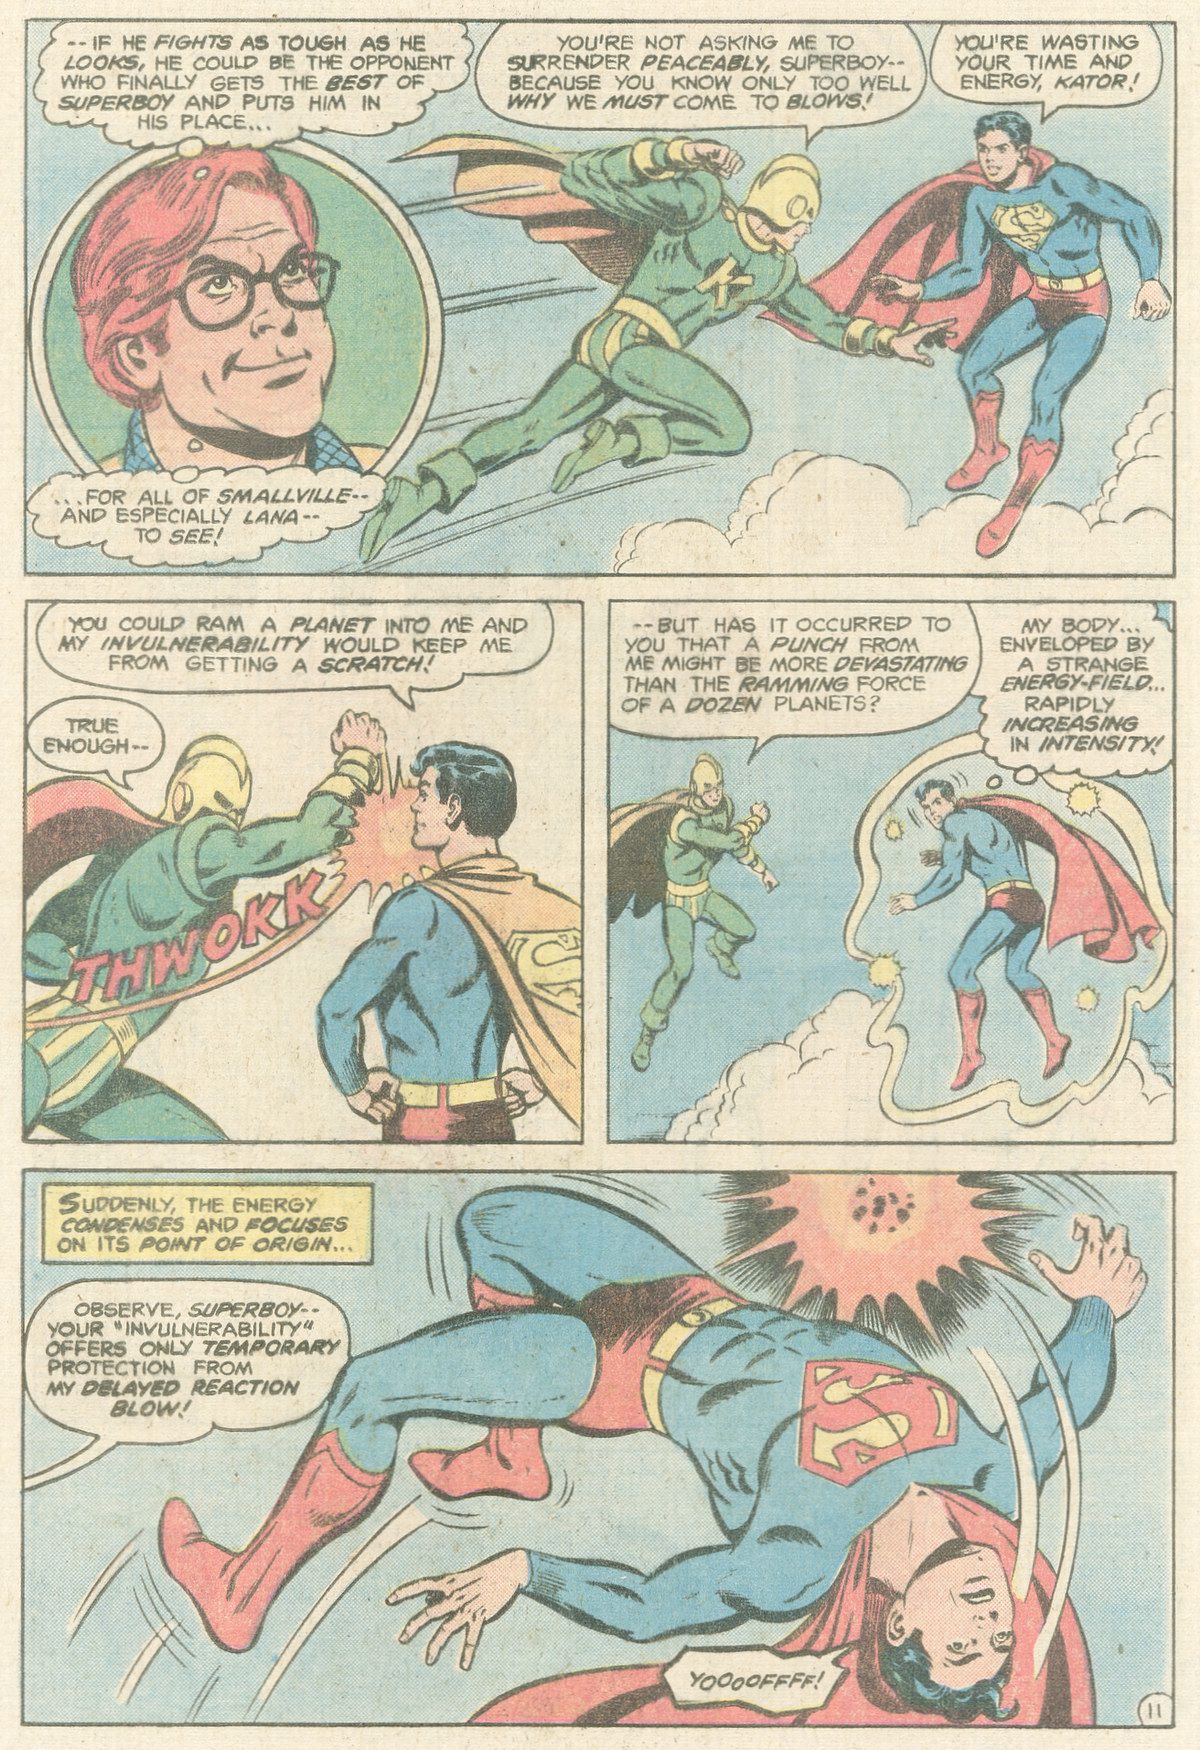 The New Adventures of Superboy 17 Page 11